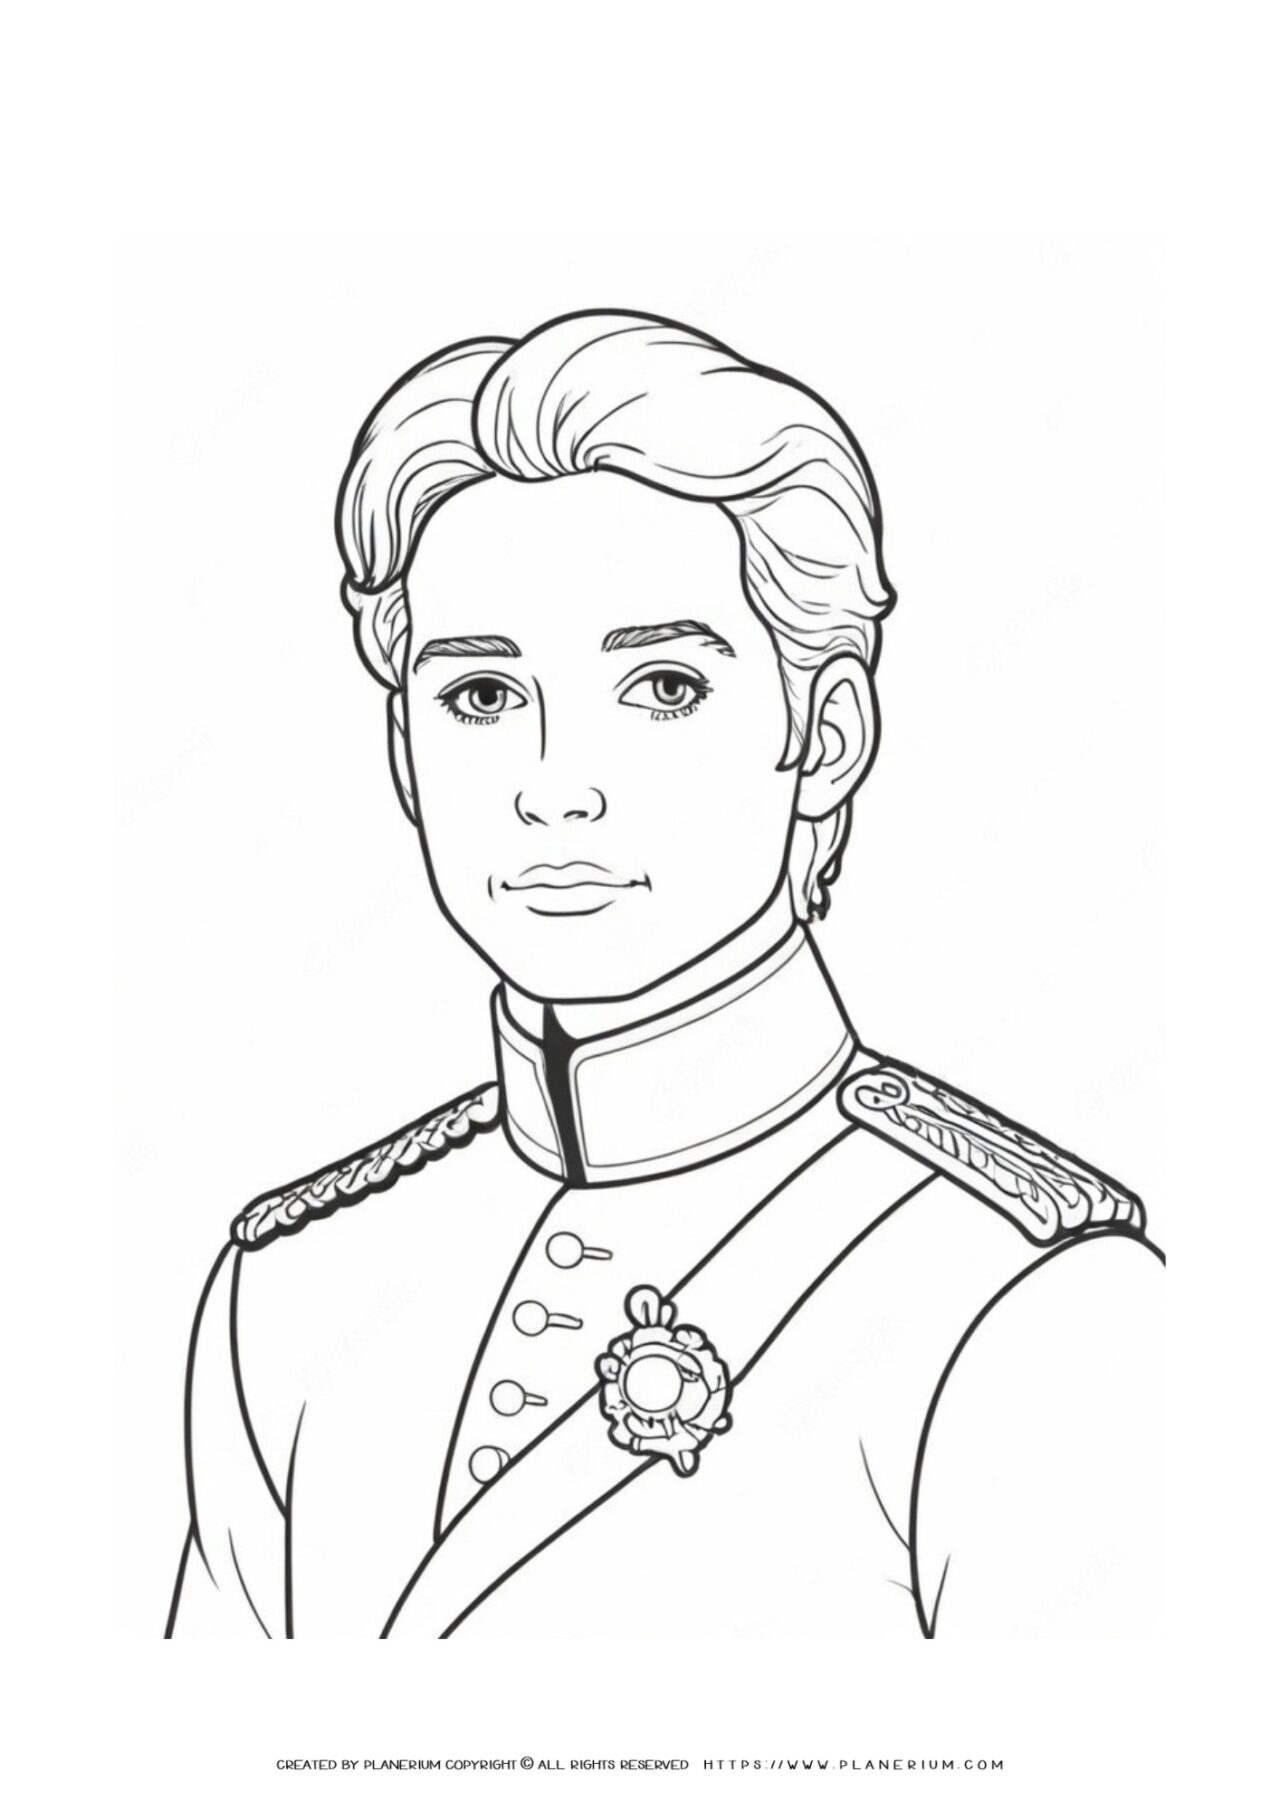 Illustration of a young prince in uniform.